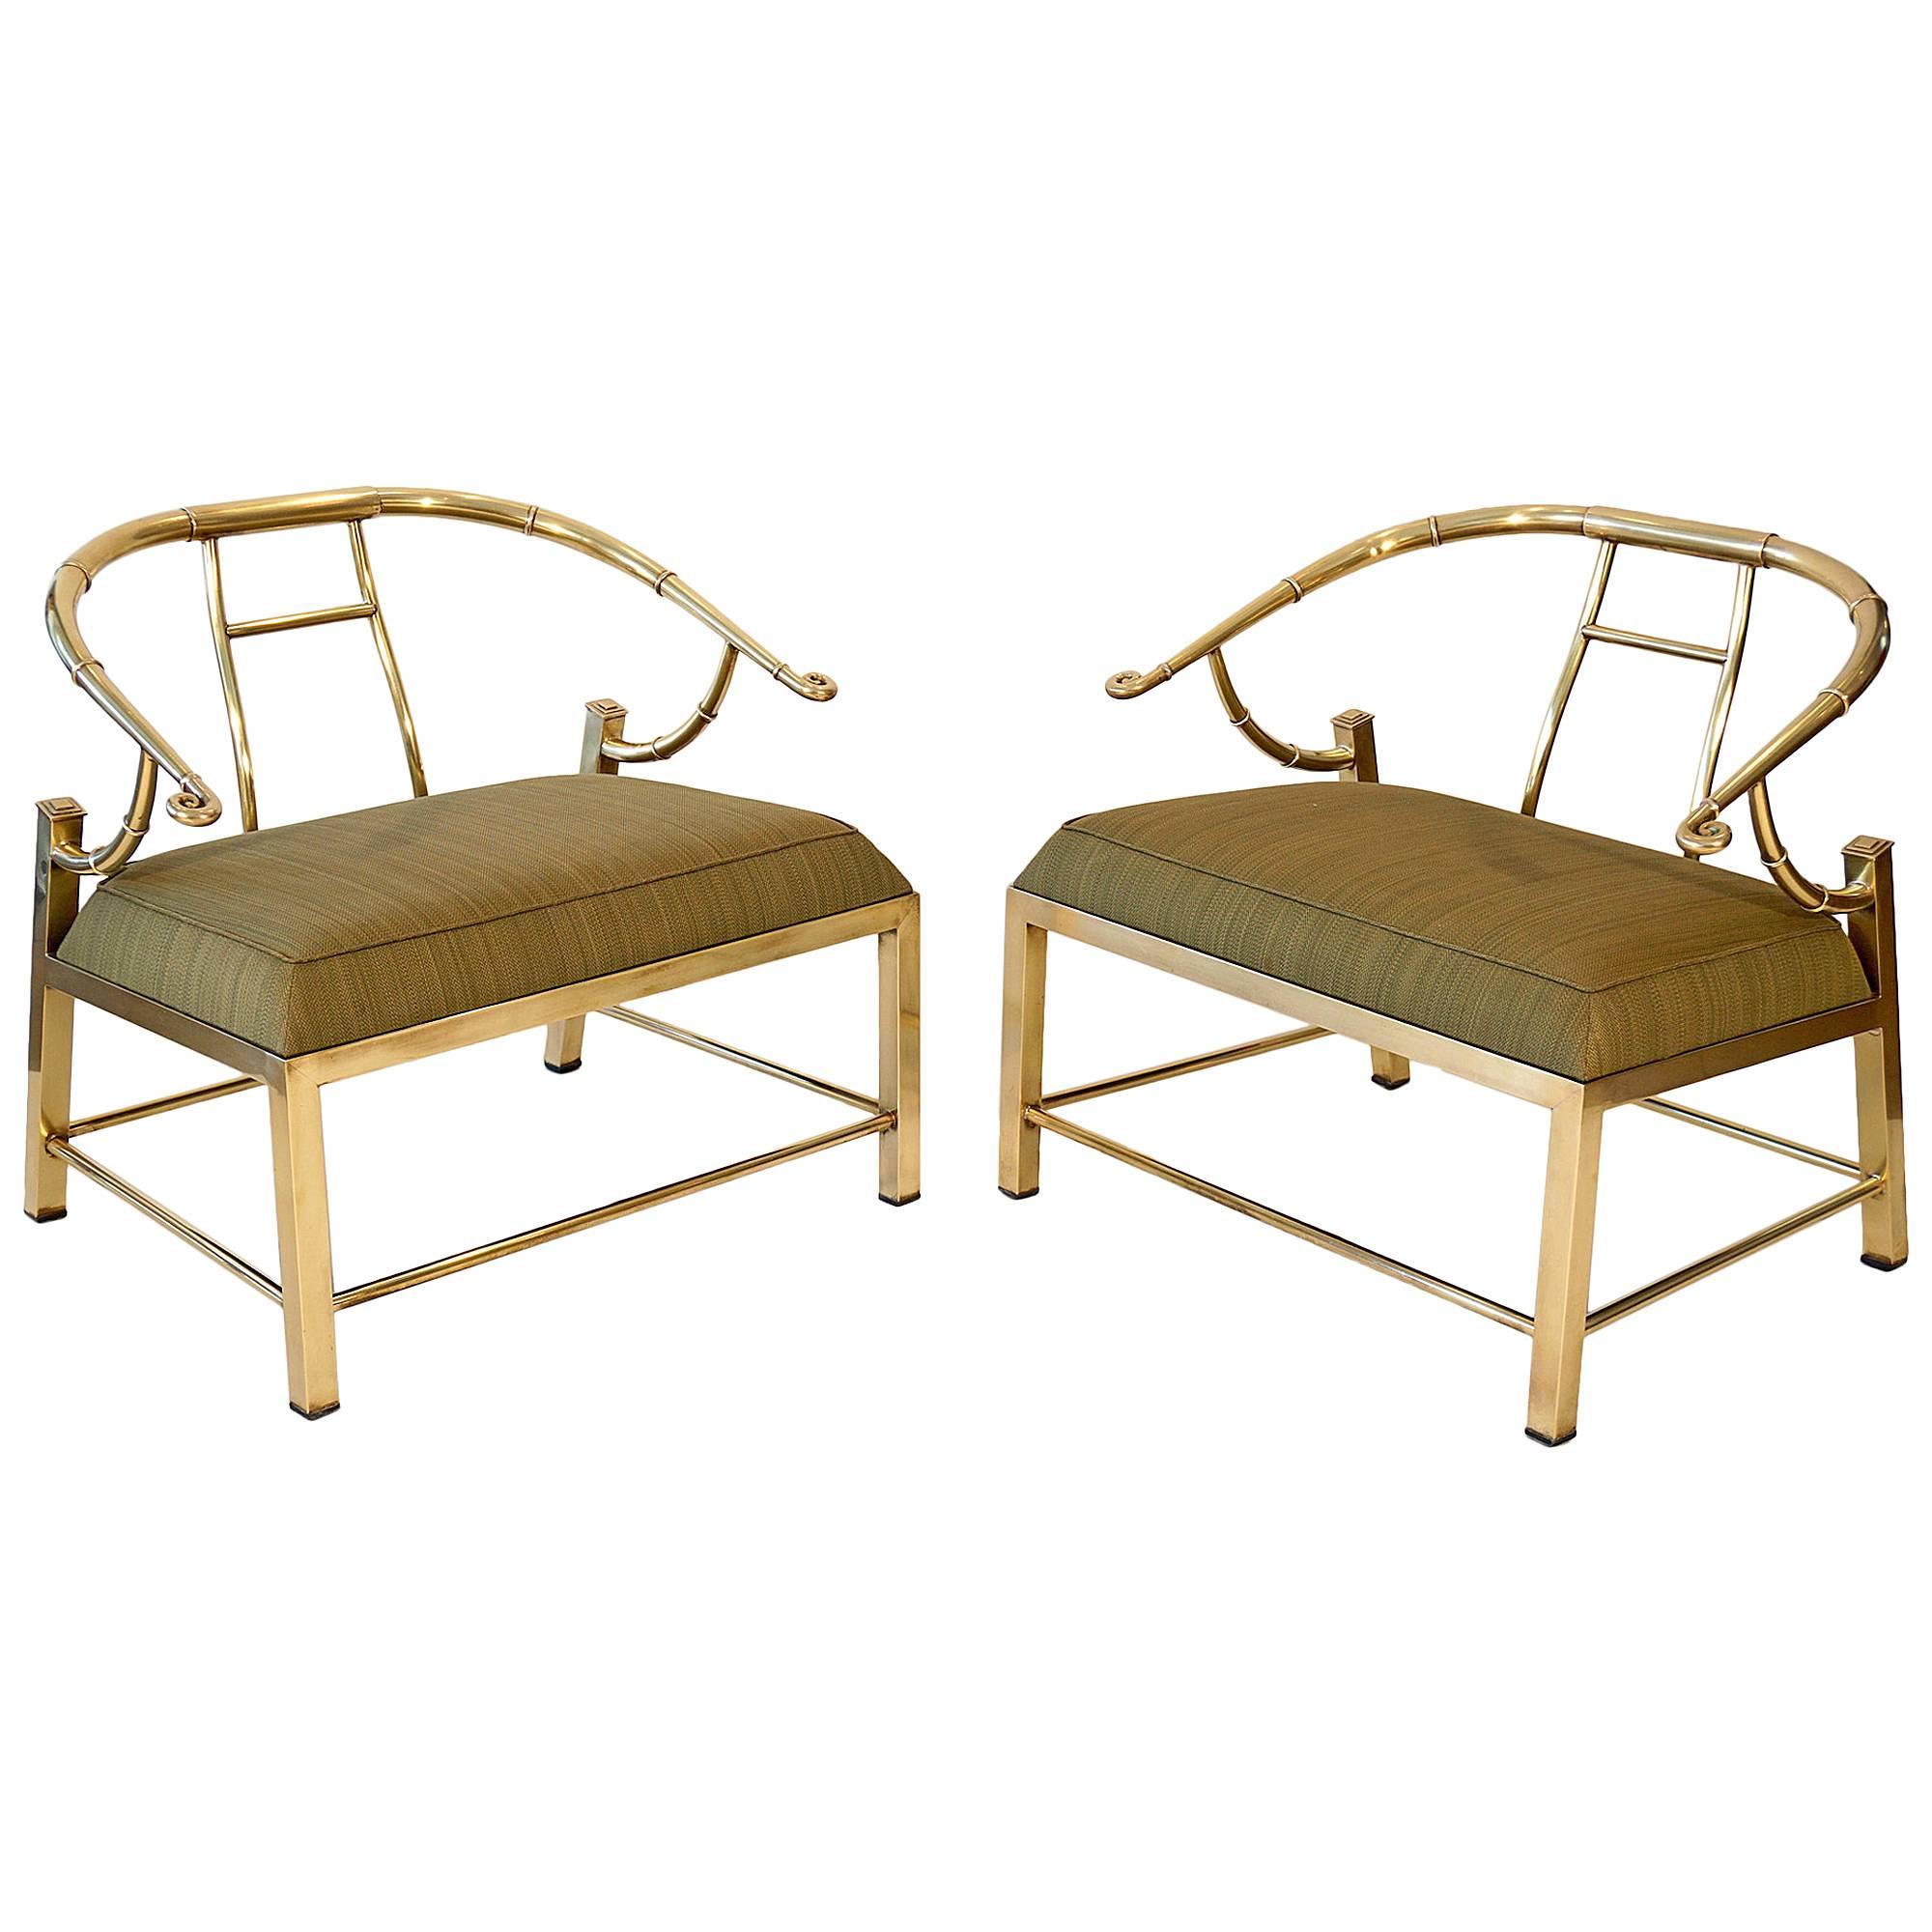 Pair of Brass Lounge Chairs by Mastercraft